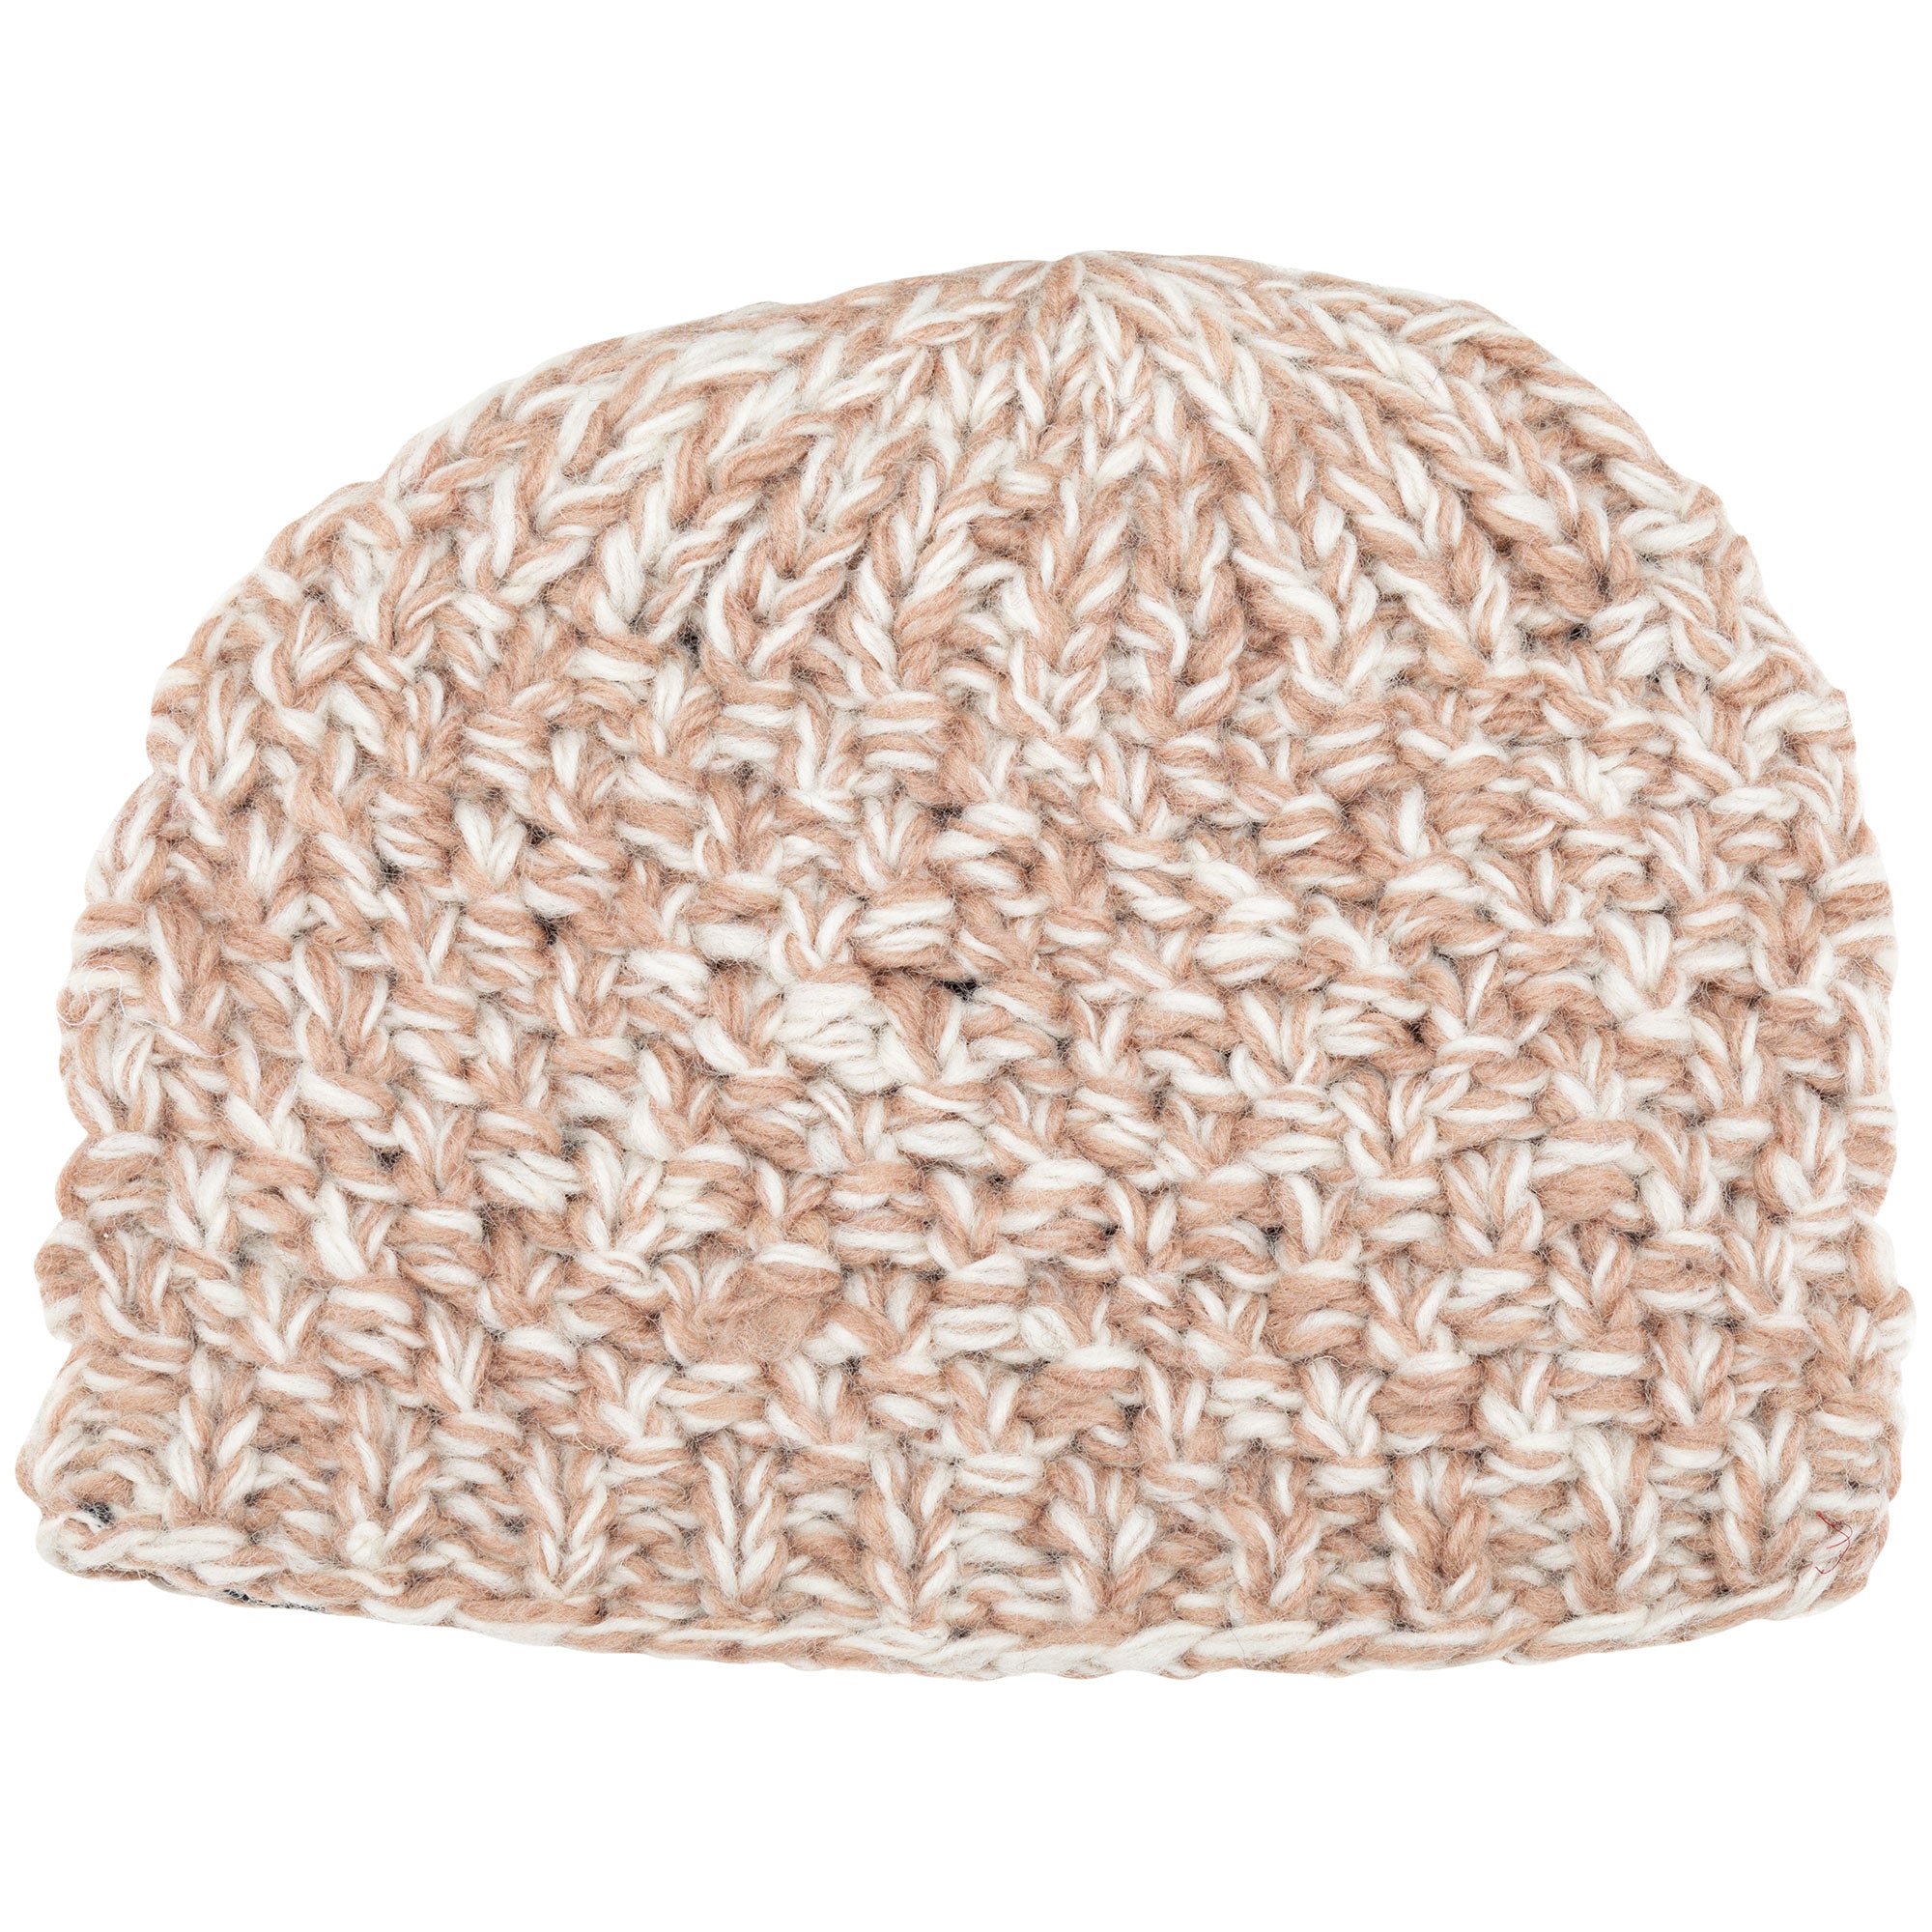 Heathered Wool Winter Accessories - Hat - Oatmeal